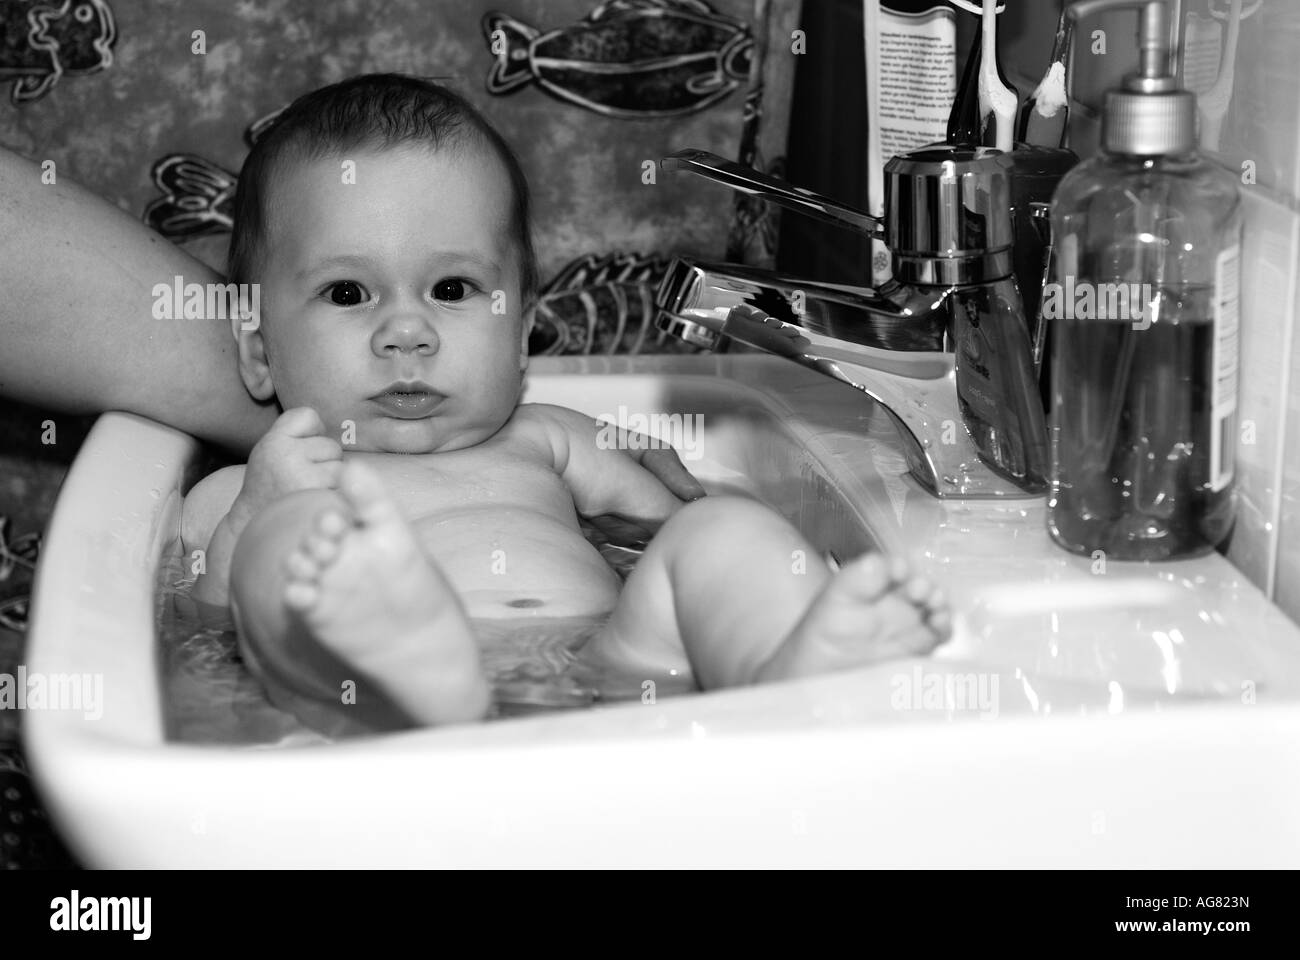 Boy with basin Black and White Stock Photos & Images - Alamy